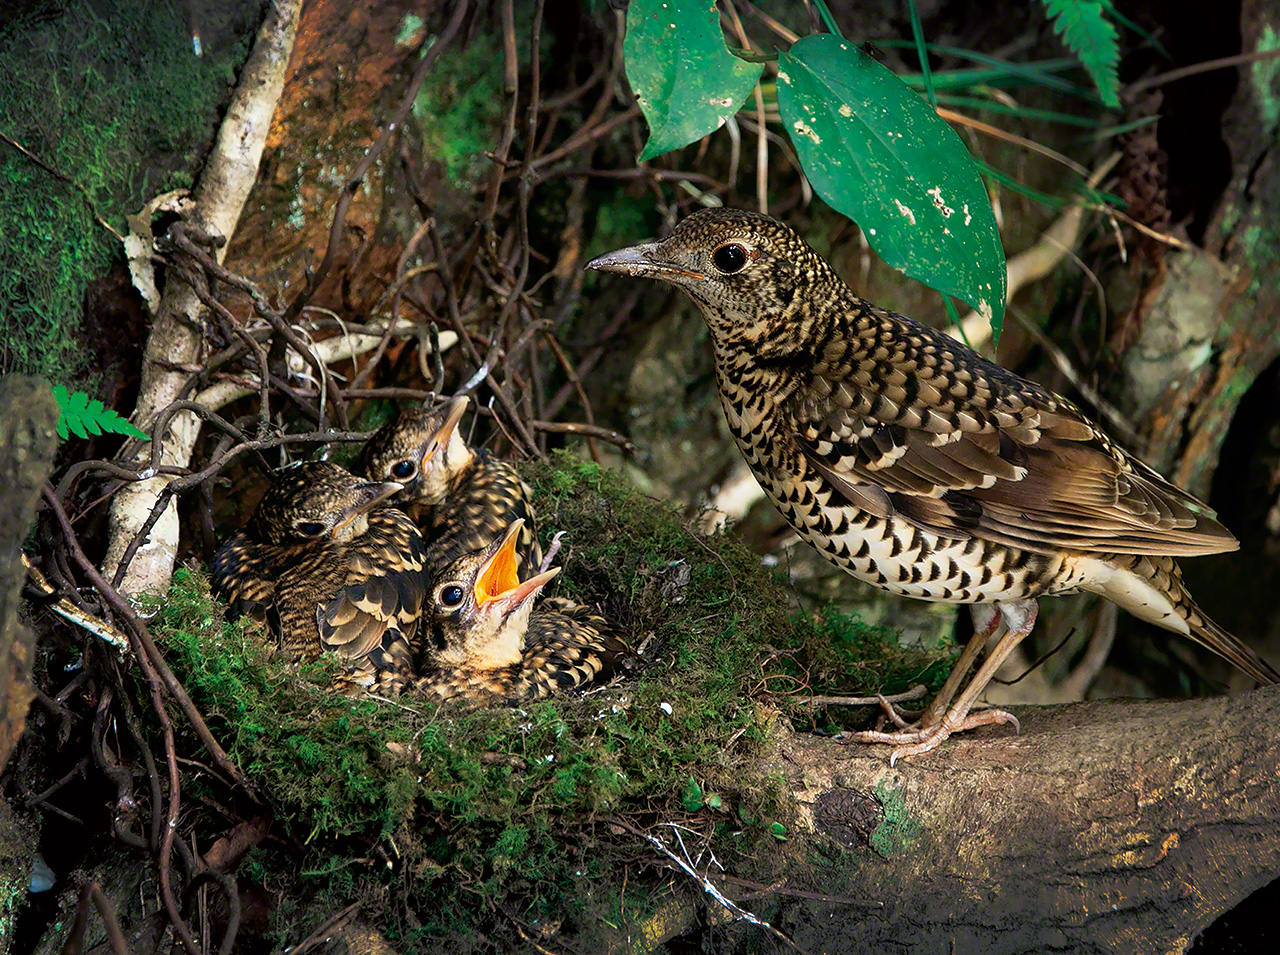 An Amami thrush and its young. A national natural monument, the bird was driven nearly to extinction due to the loss of its habit from logging. The population is gradually recovering as reforestation efforts continue.